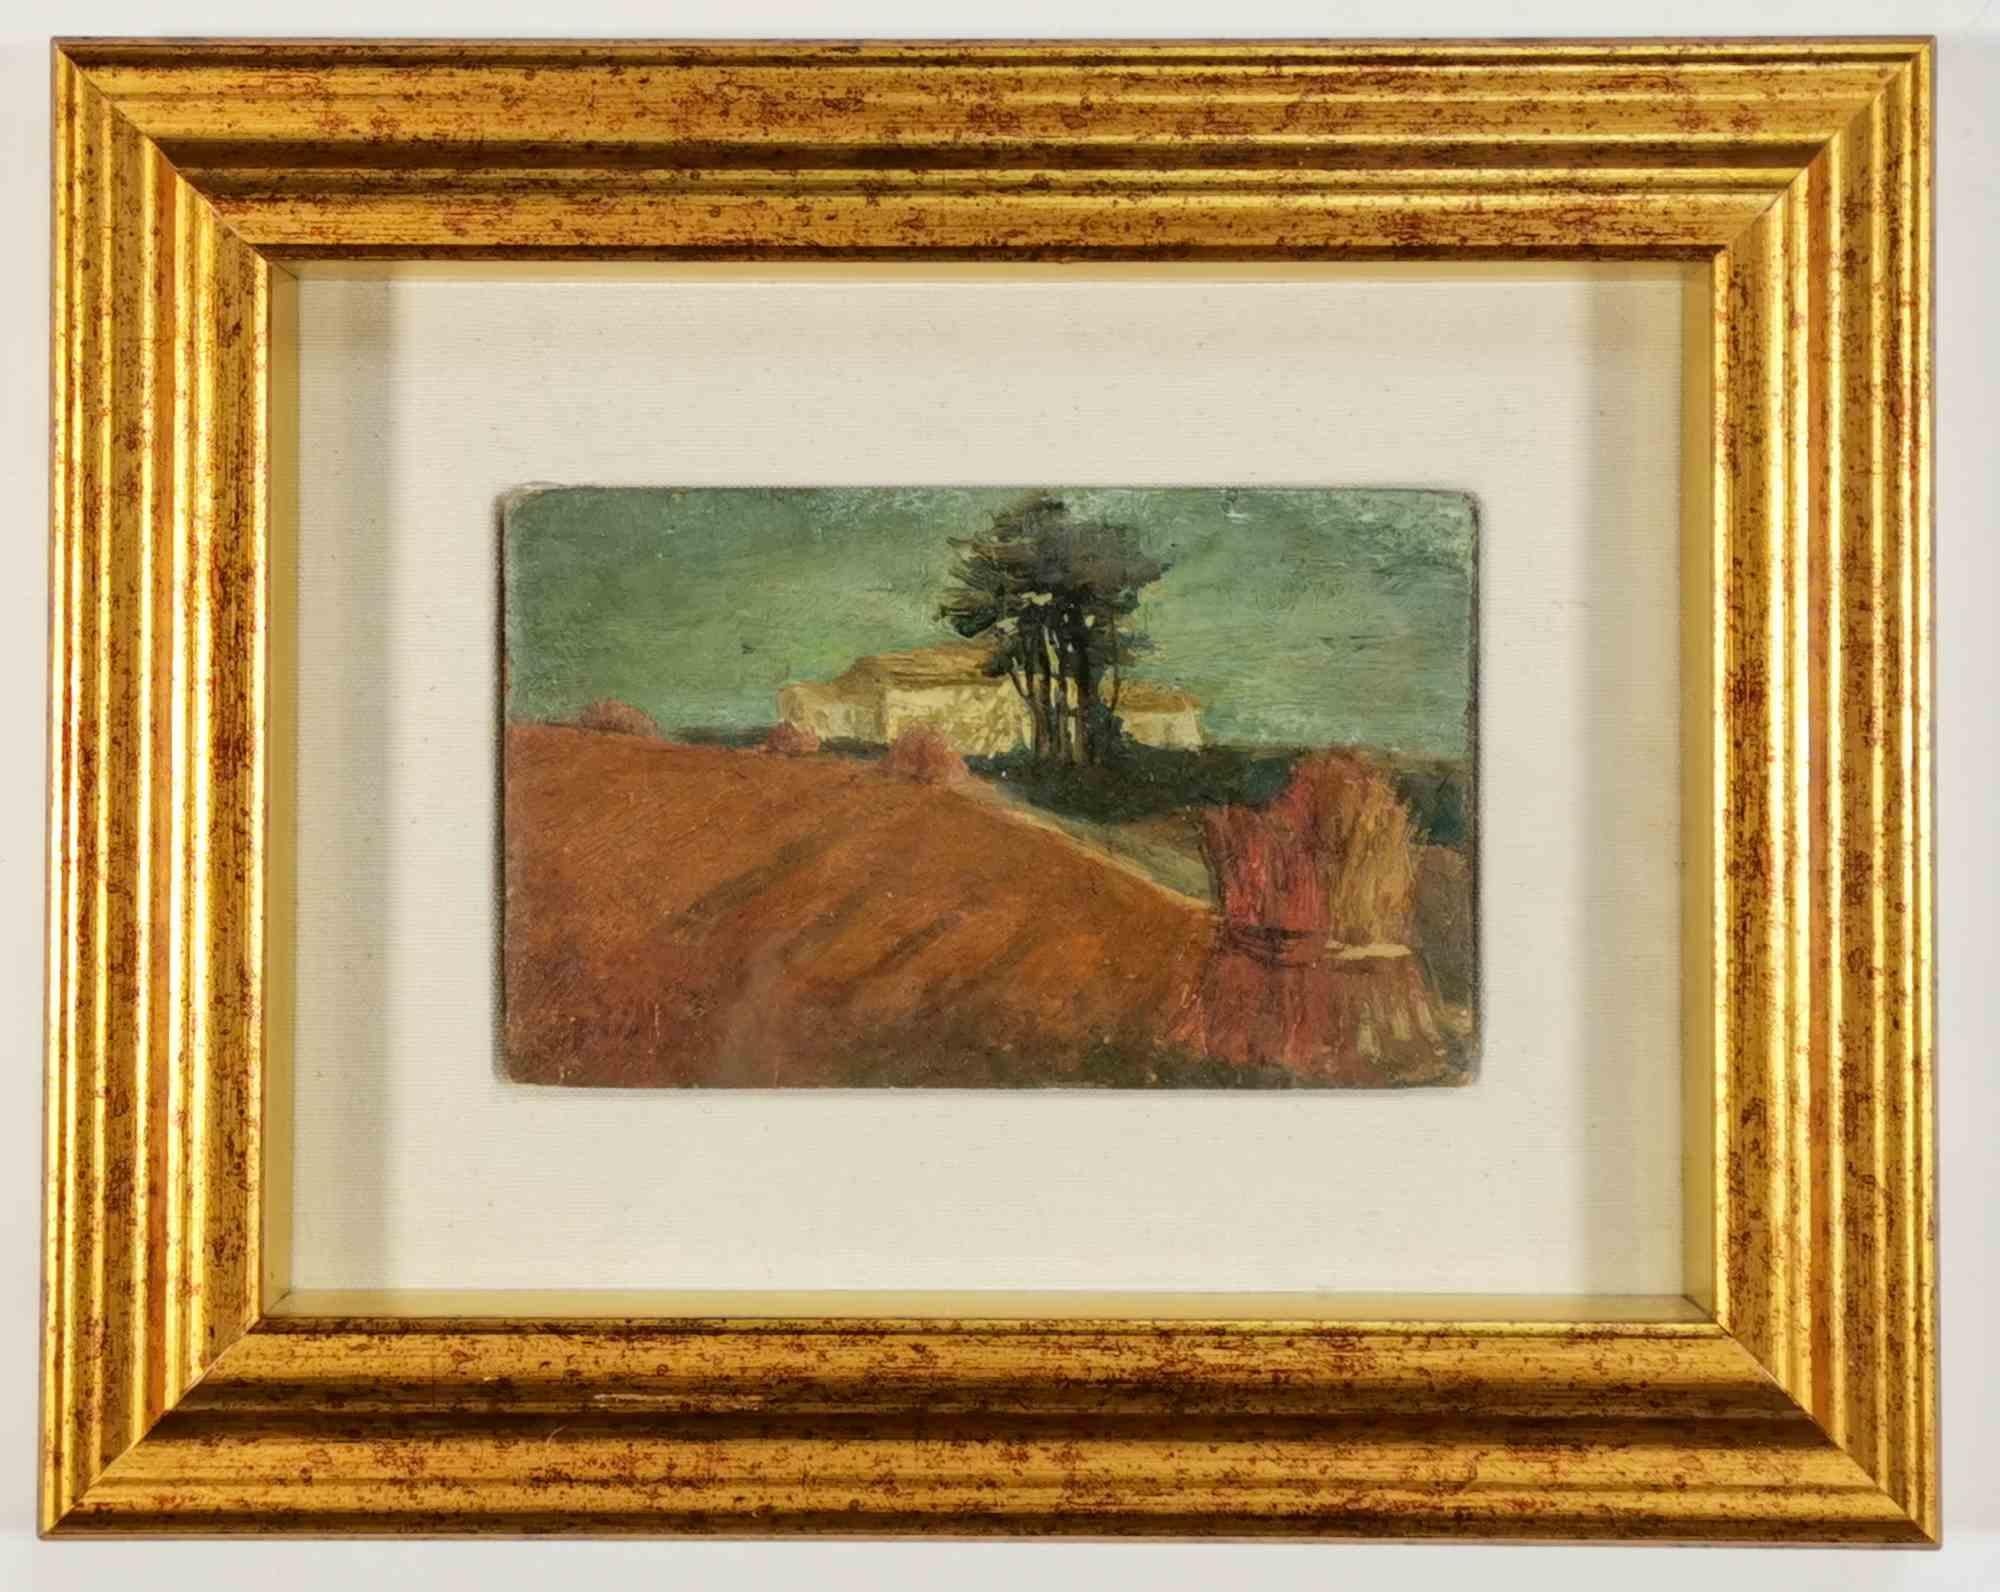 Unknown Figurative Painting - Countryside Landscape - Painting - 19th Century